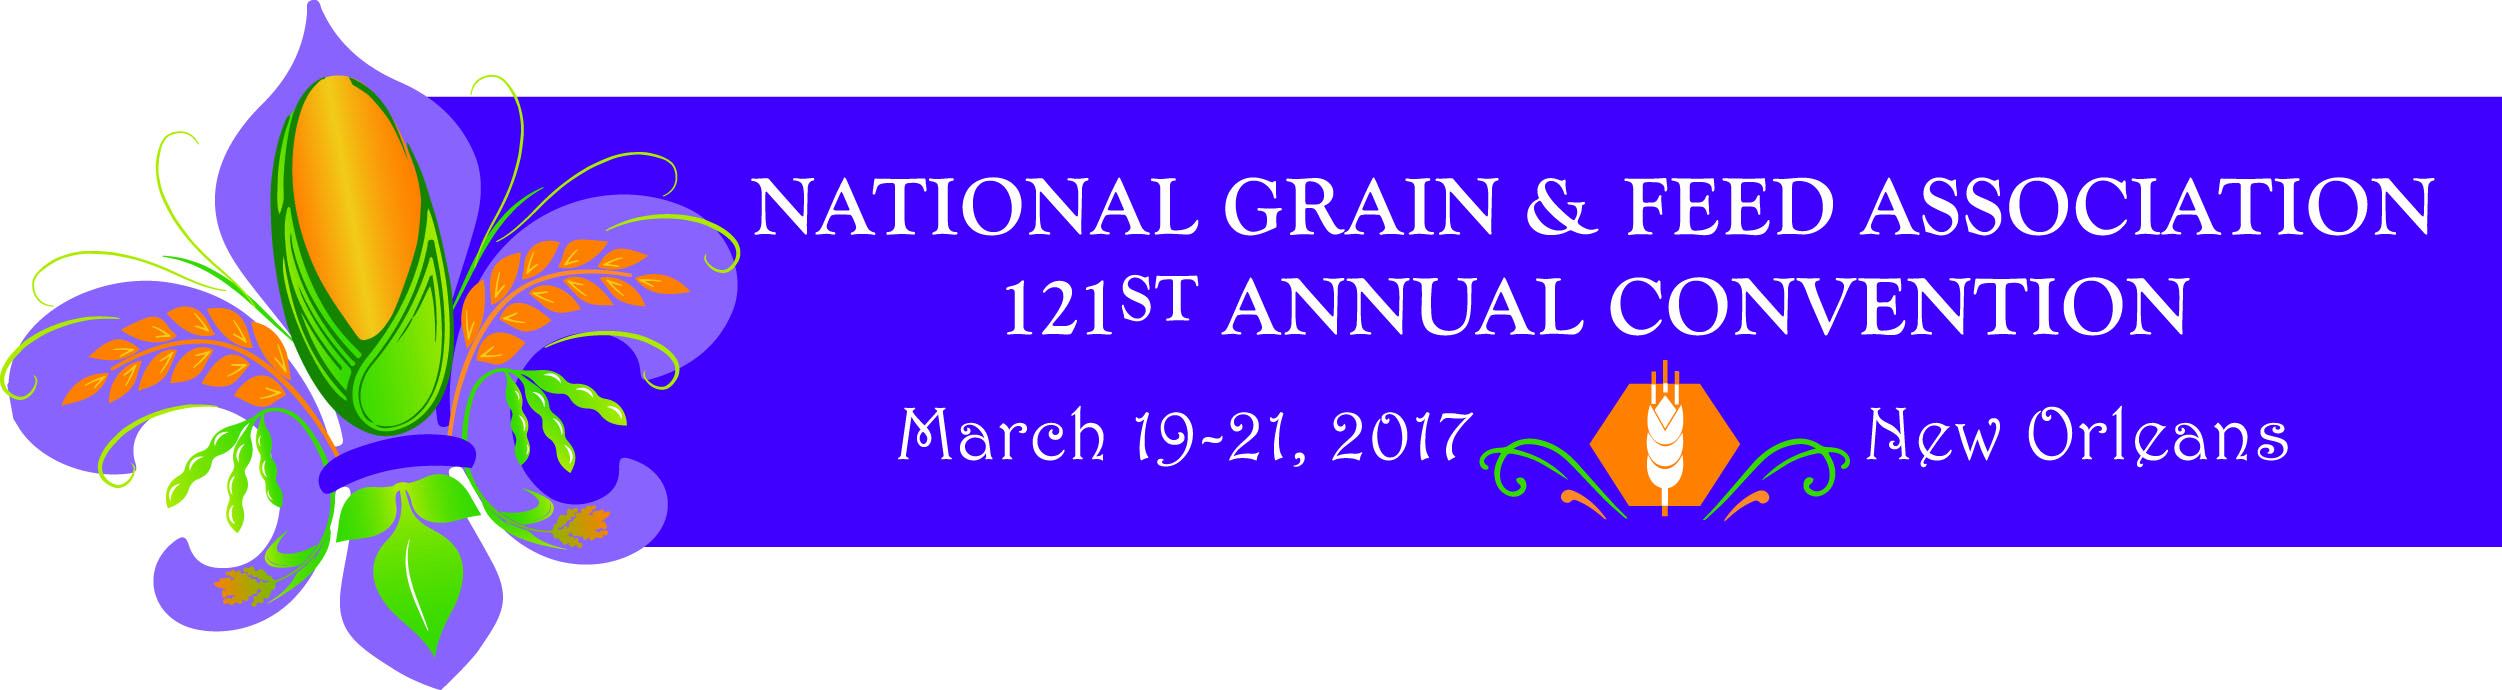 Annual Convention National Grain and Feed Association National Grain